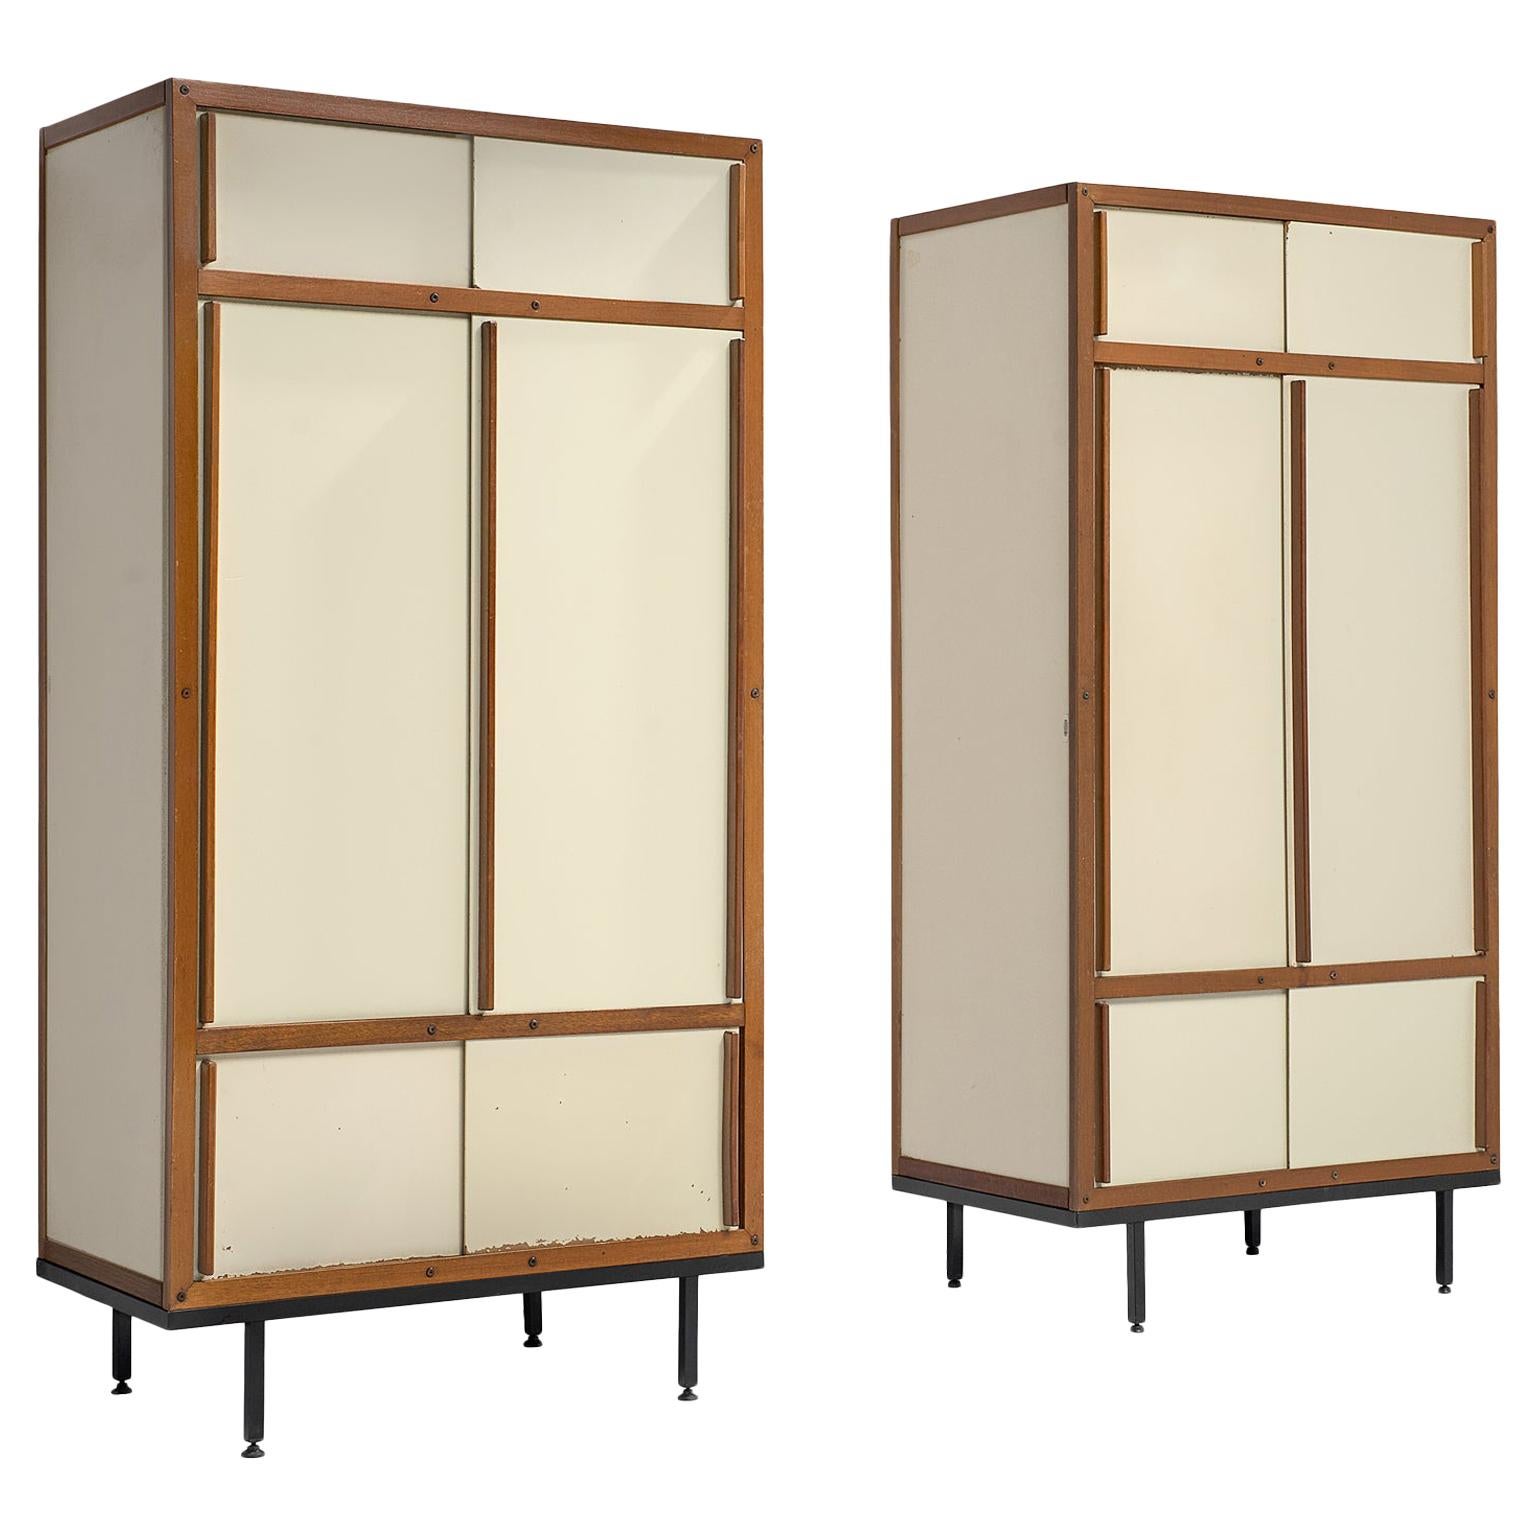 André Sornay Pair of Original Armoires in Cream and Mahogany with Sliding Doors